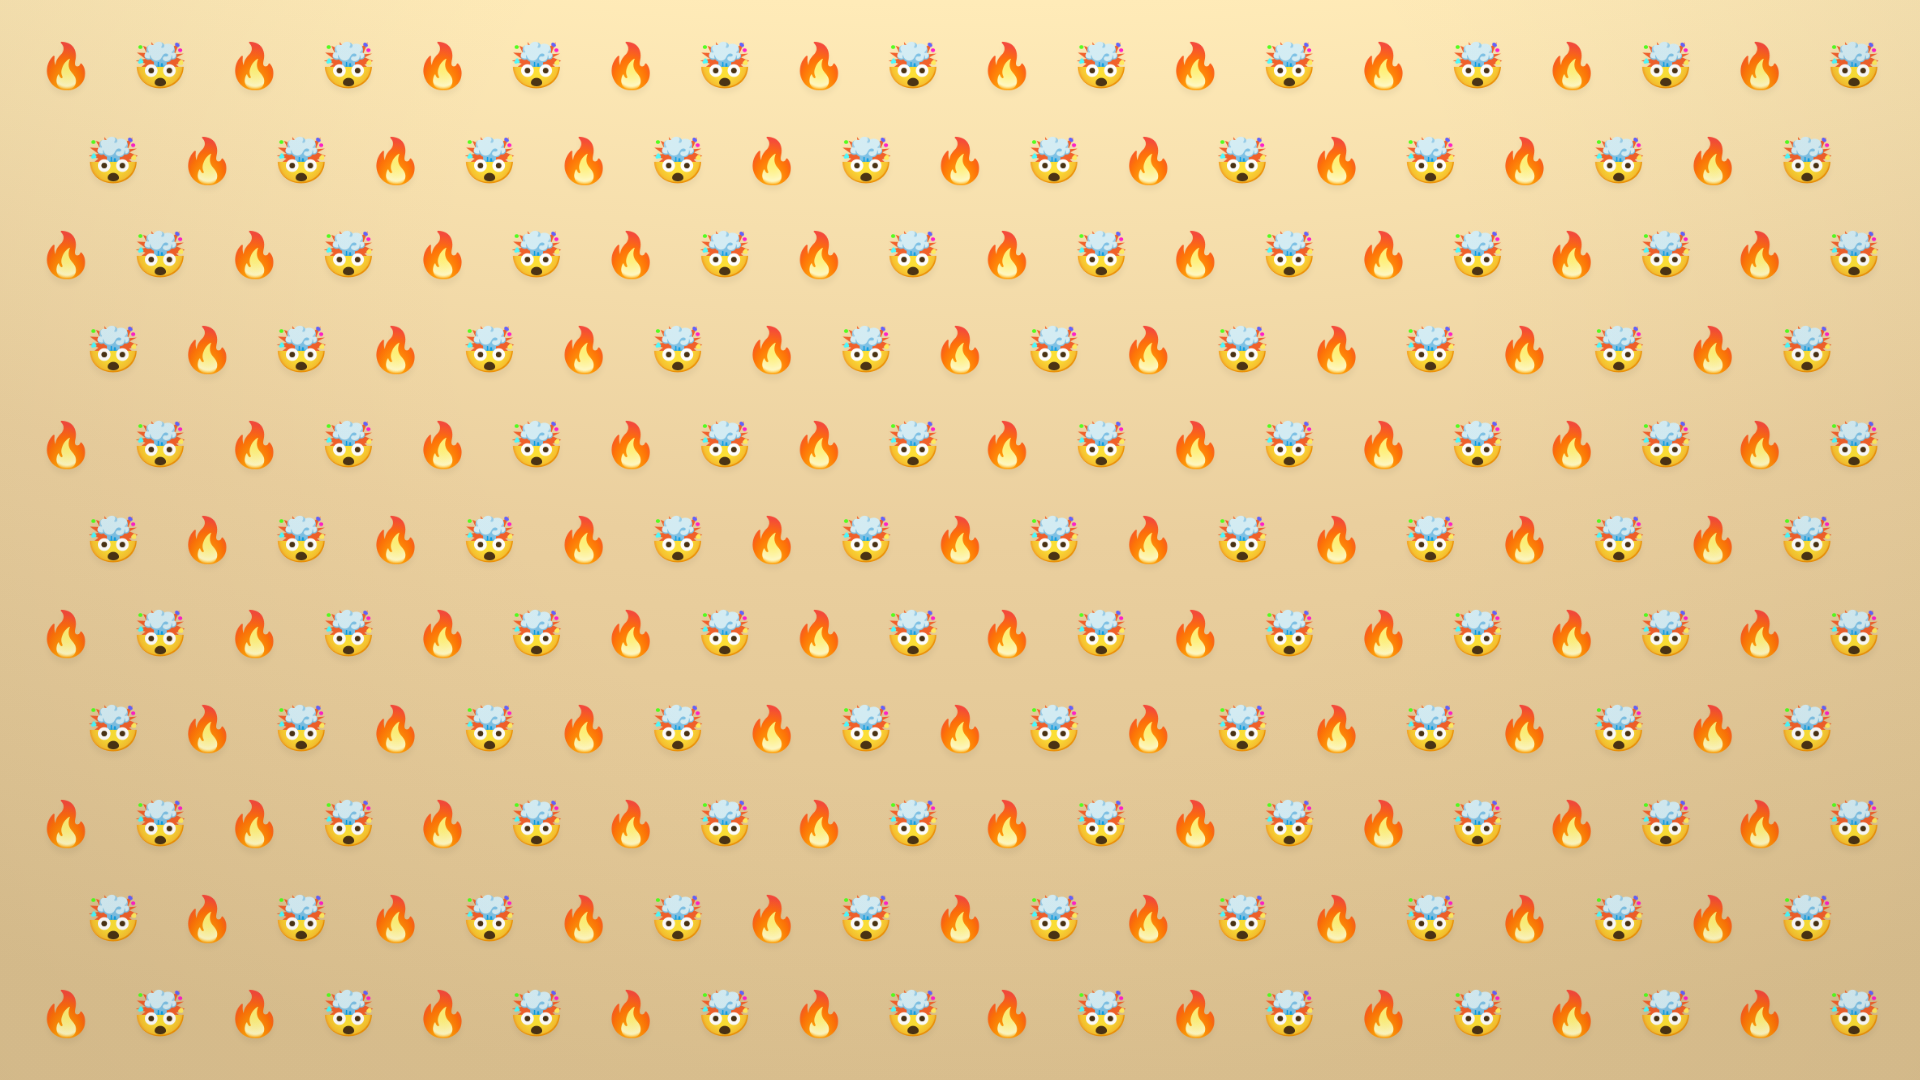 This website lets you create custom wallpaper from your favorite emojis